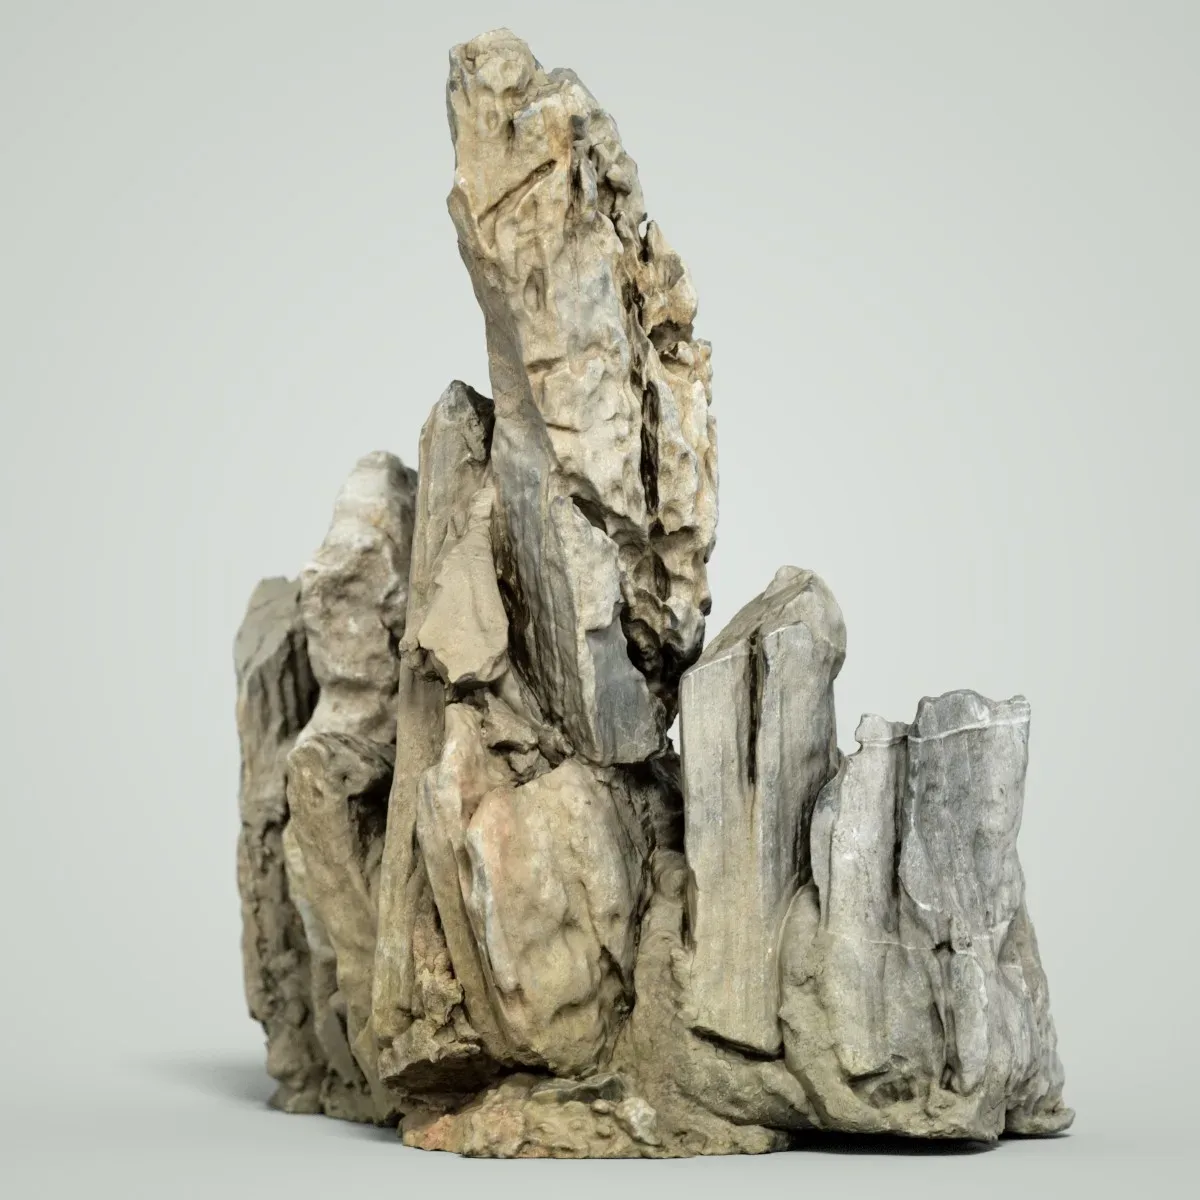 3D Scanned Spiky Rock Collection